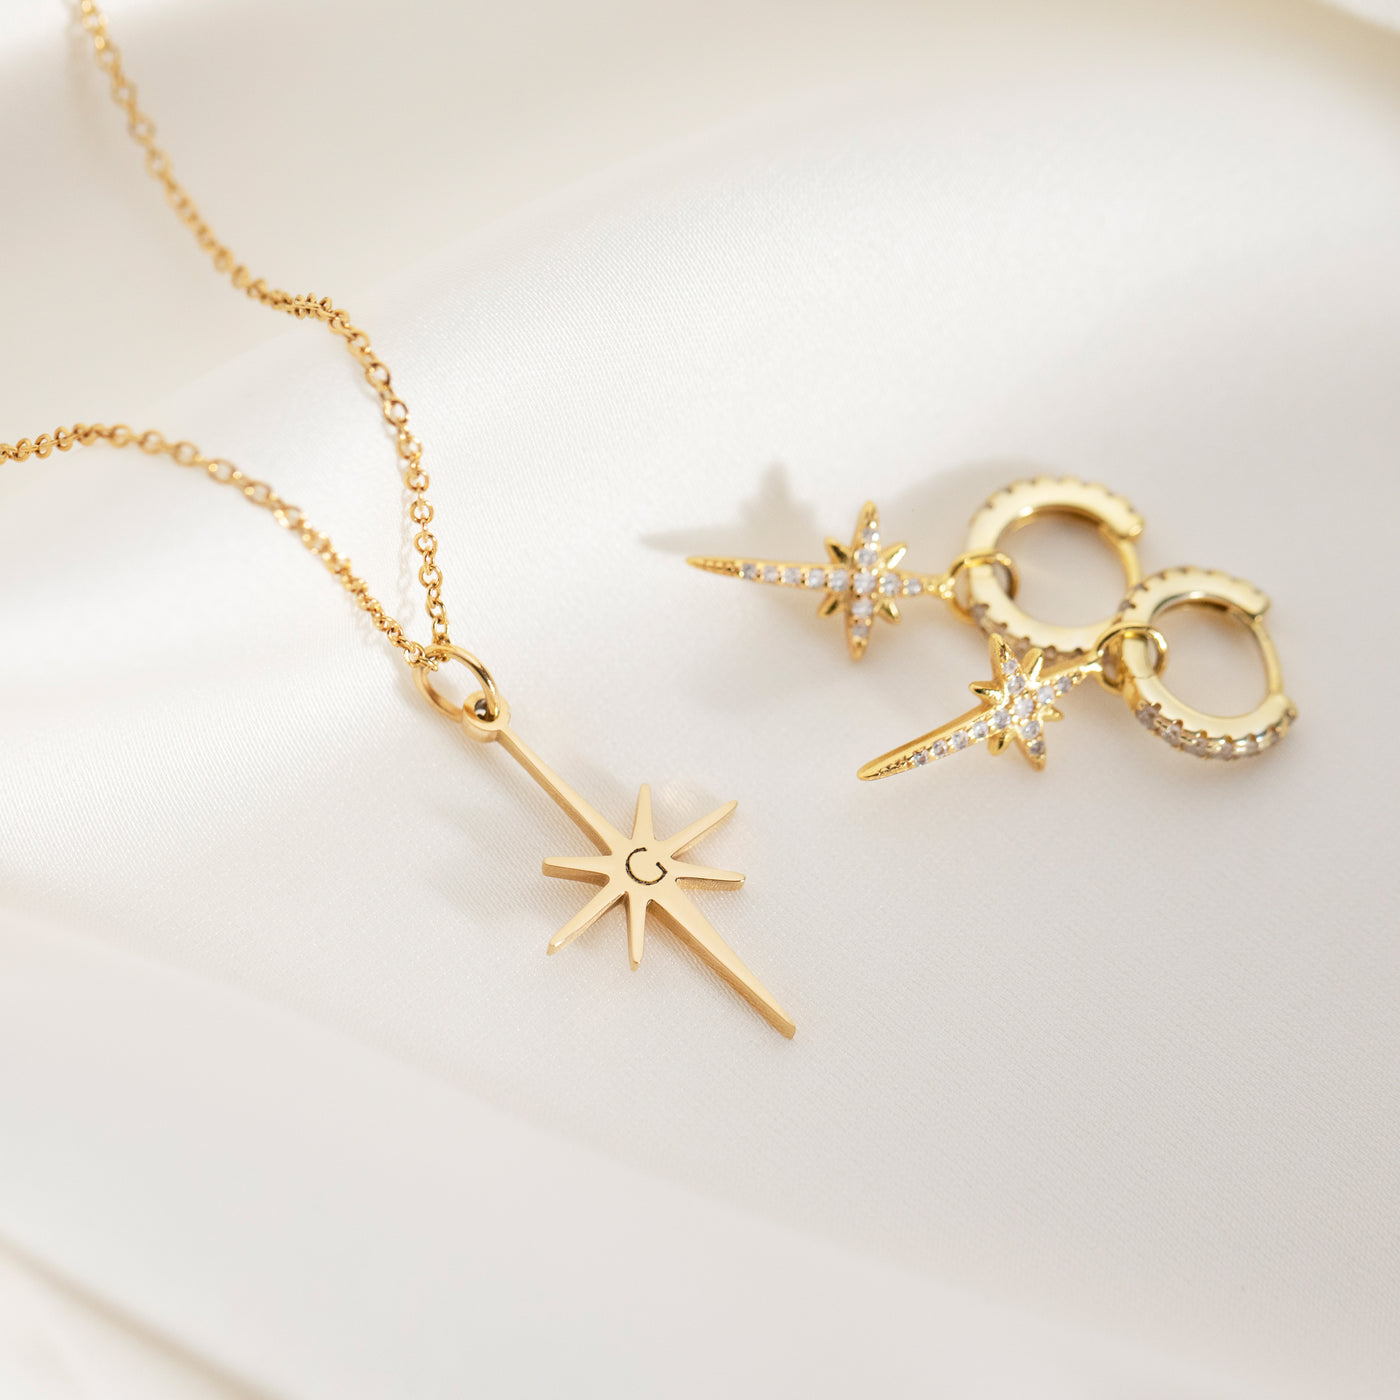 North Star Necklace in Gold